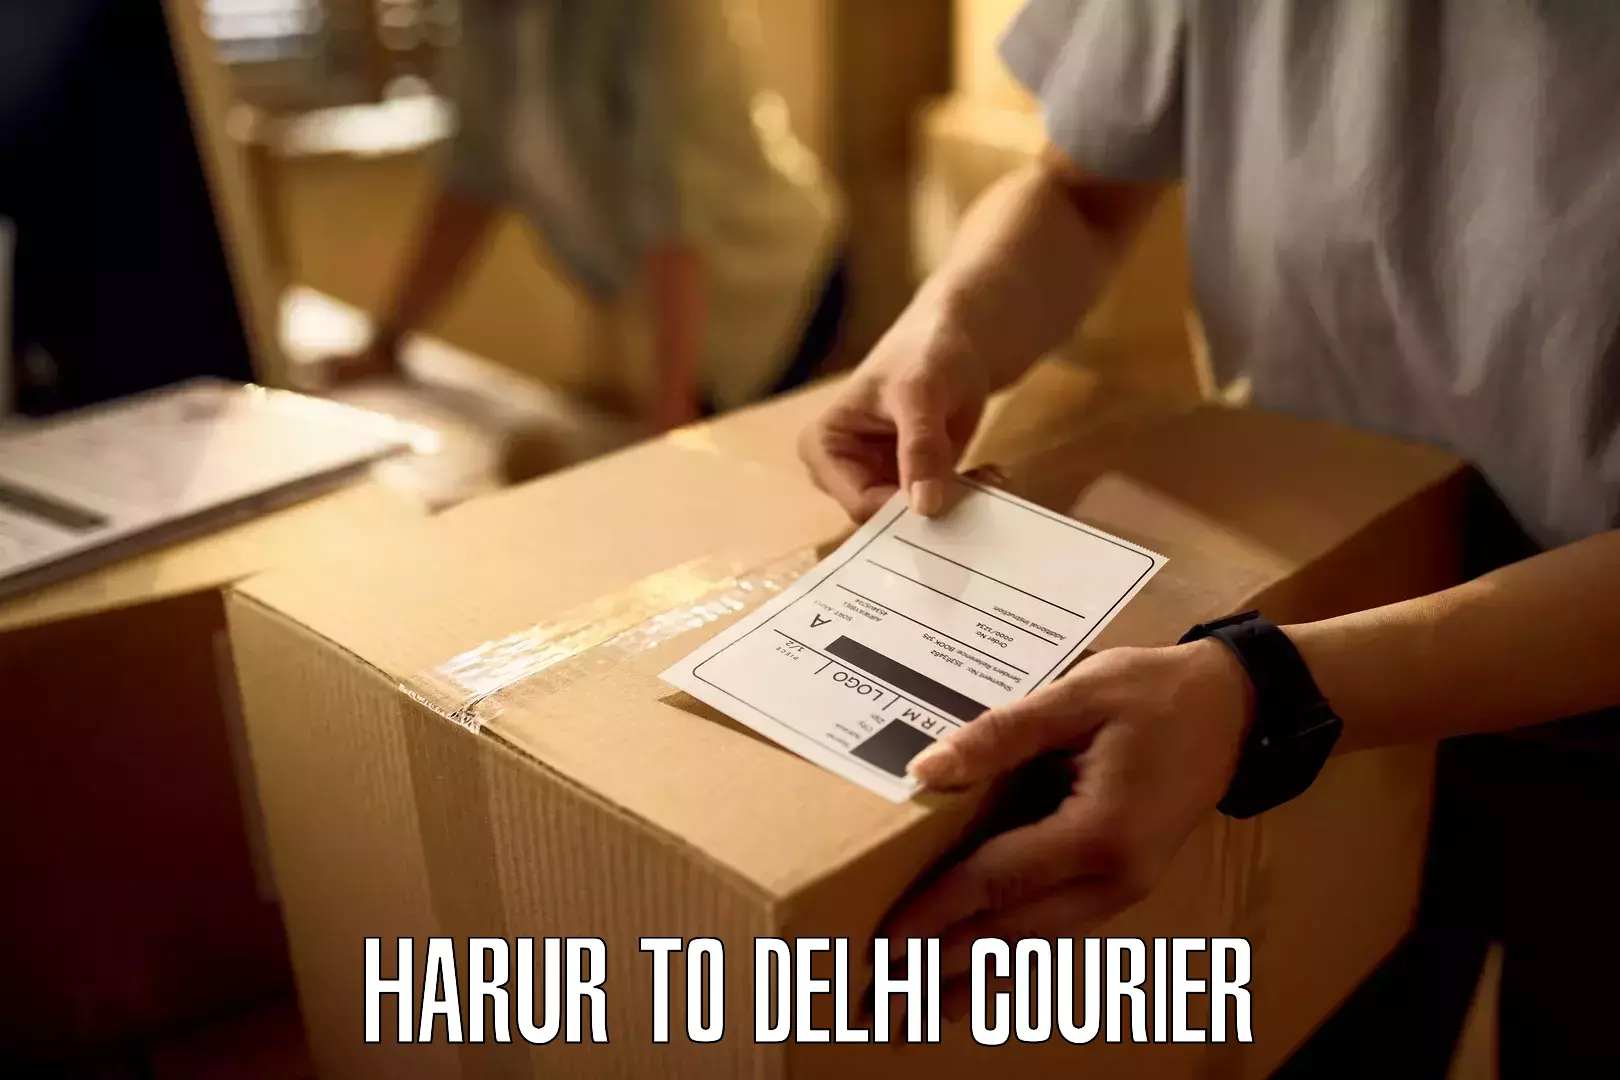 Express delivery capabilities Harur to NCR